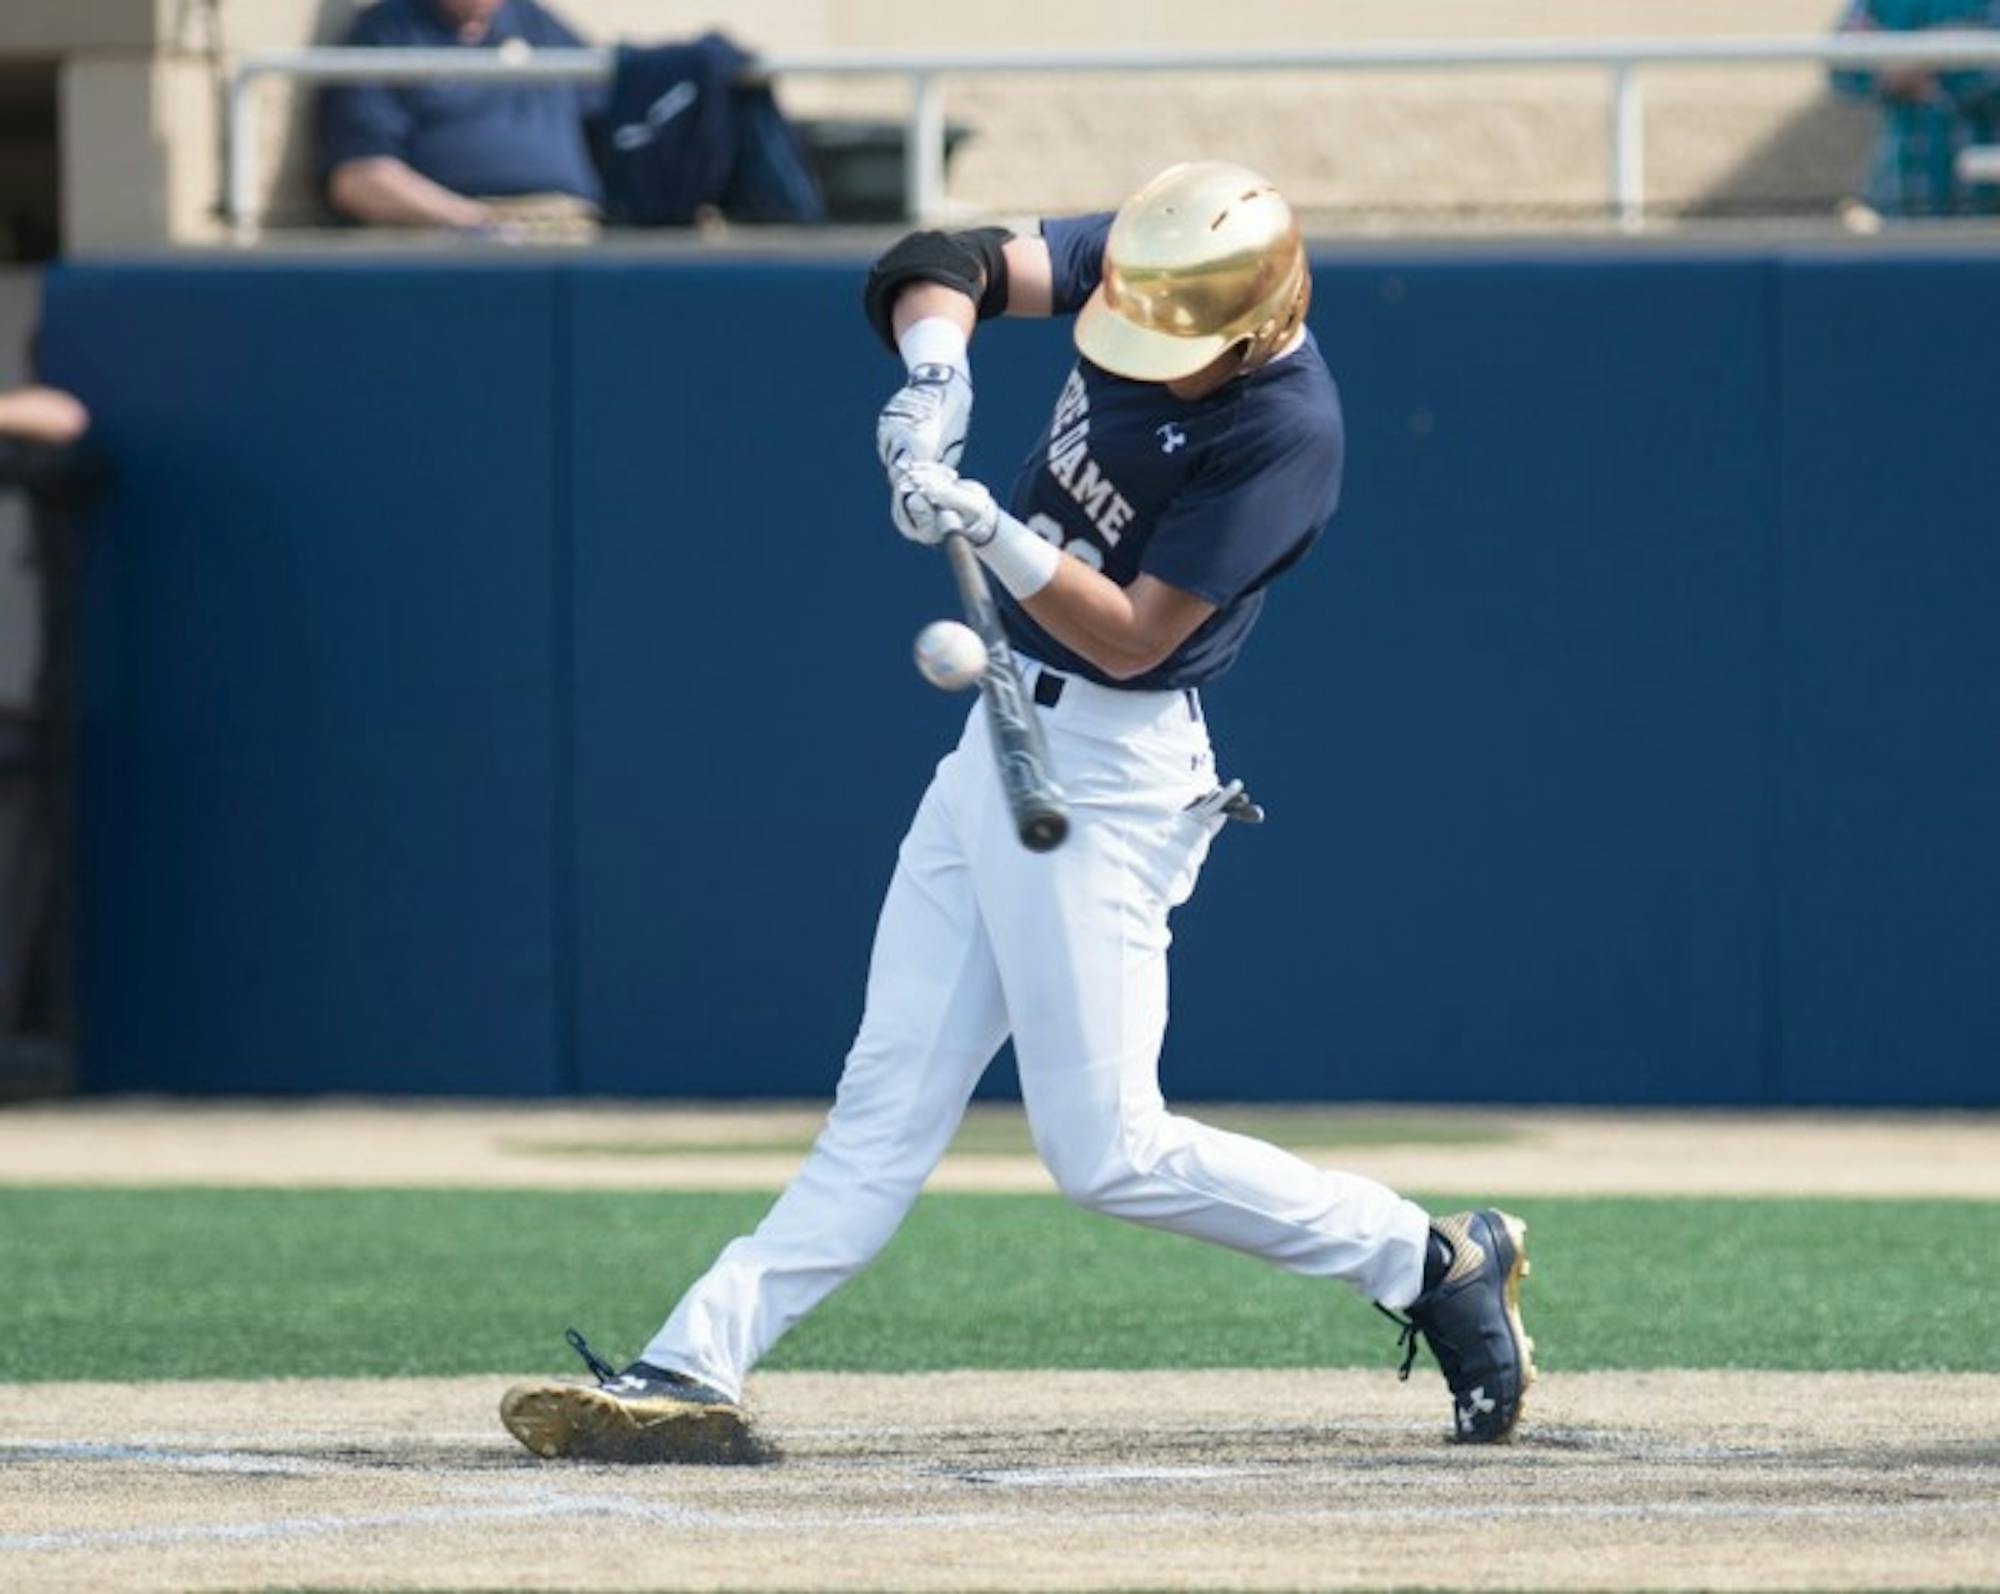 Junior second baseman Cavan Biggio connects for a single during Notre Dame’s 4-2 loss to NC State at Eck Stadium on April 18, 2015. Biggio scored on an inside-the-park home run this weekend at Santa Clara.